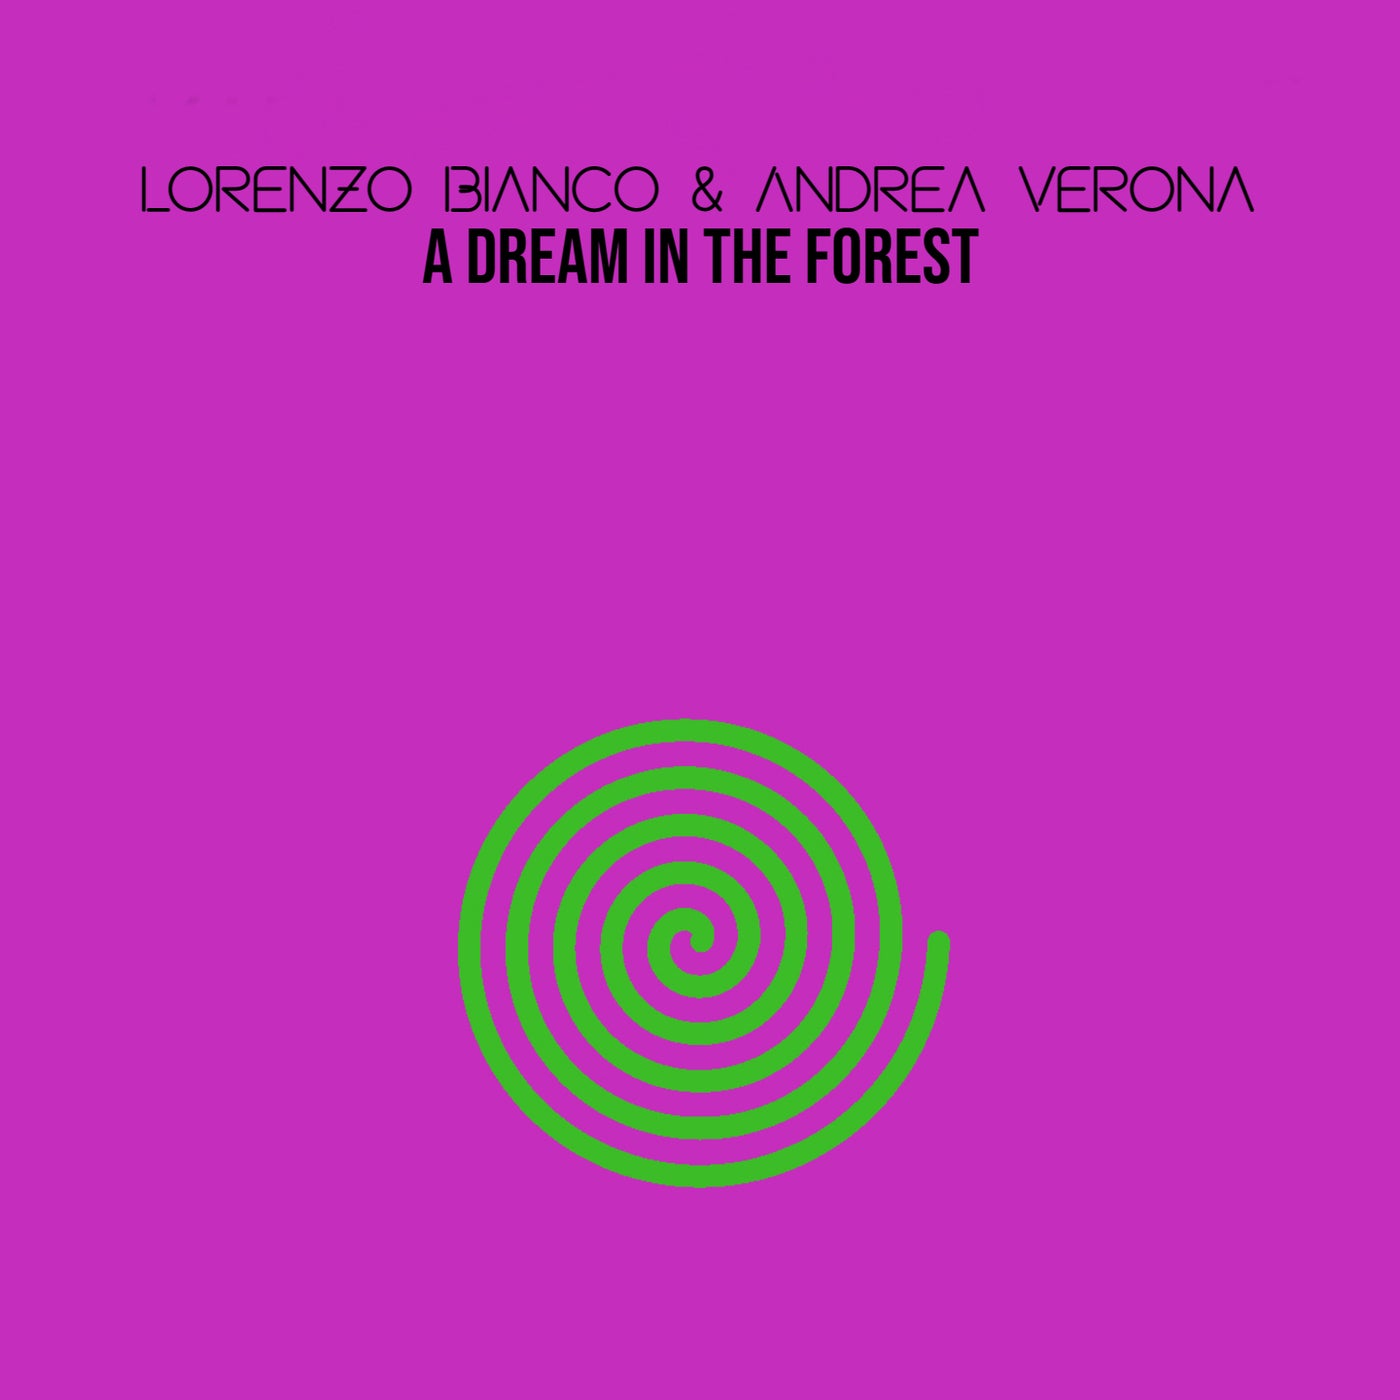 A dream in the forest